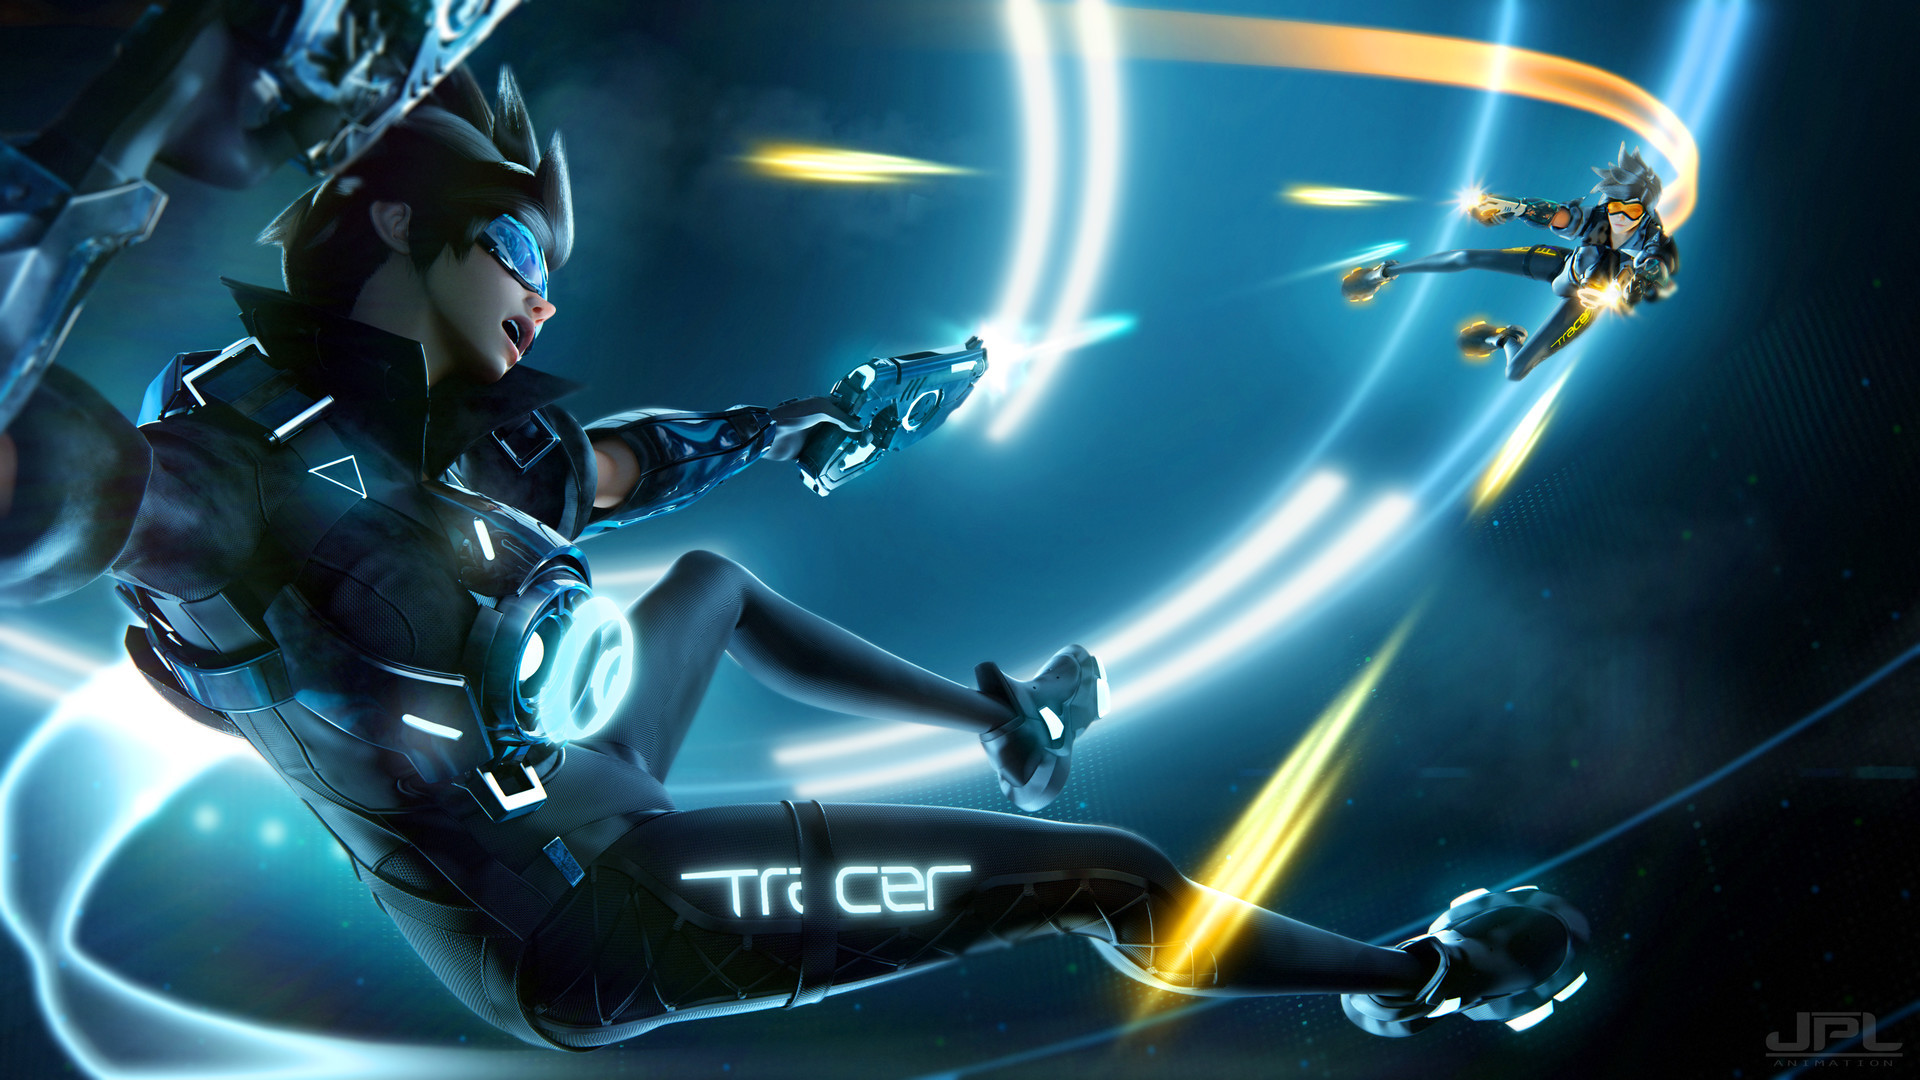 1920x1080 Tracer Tron